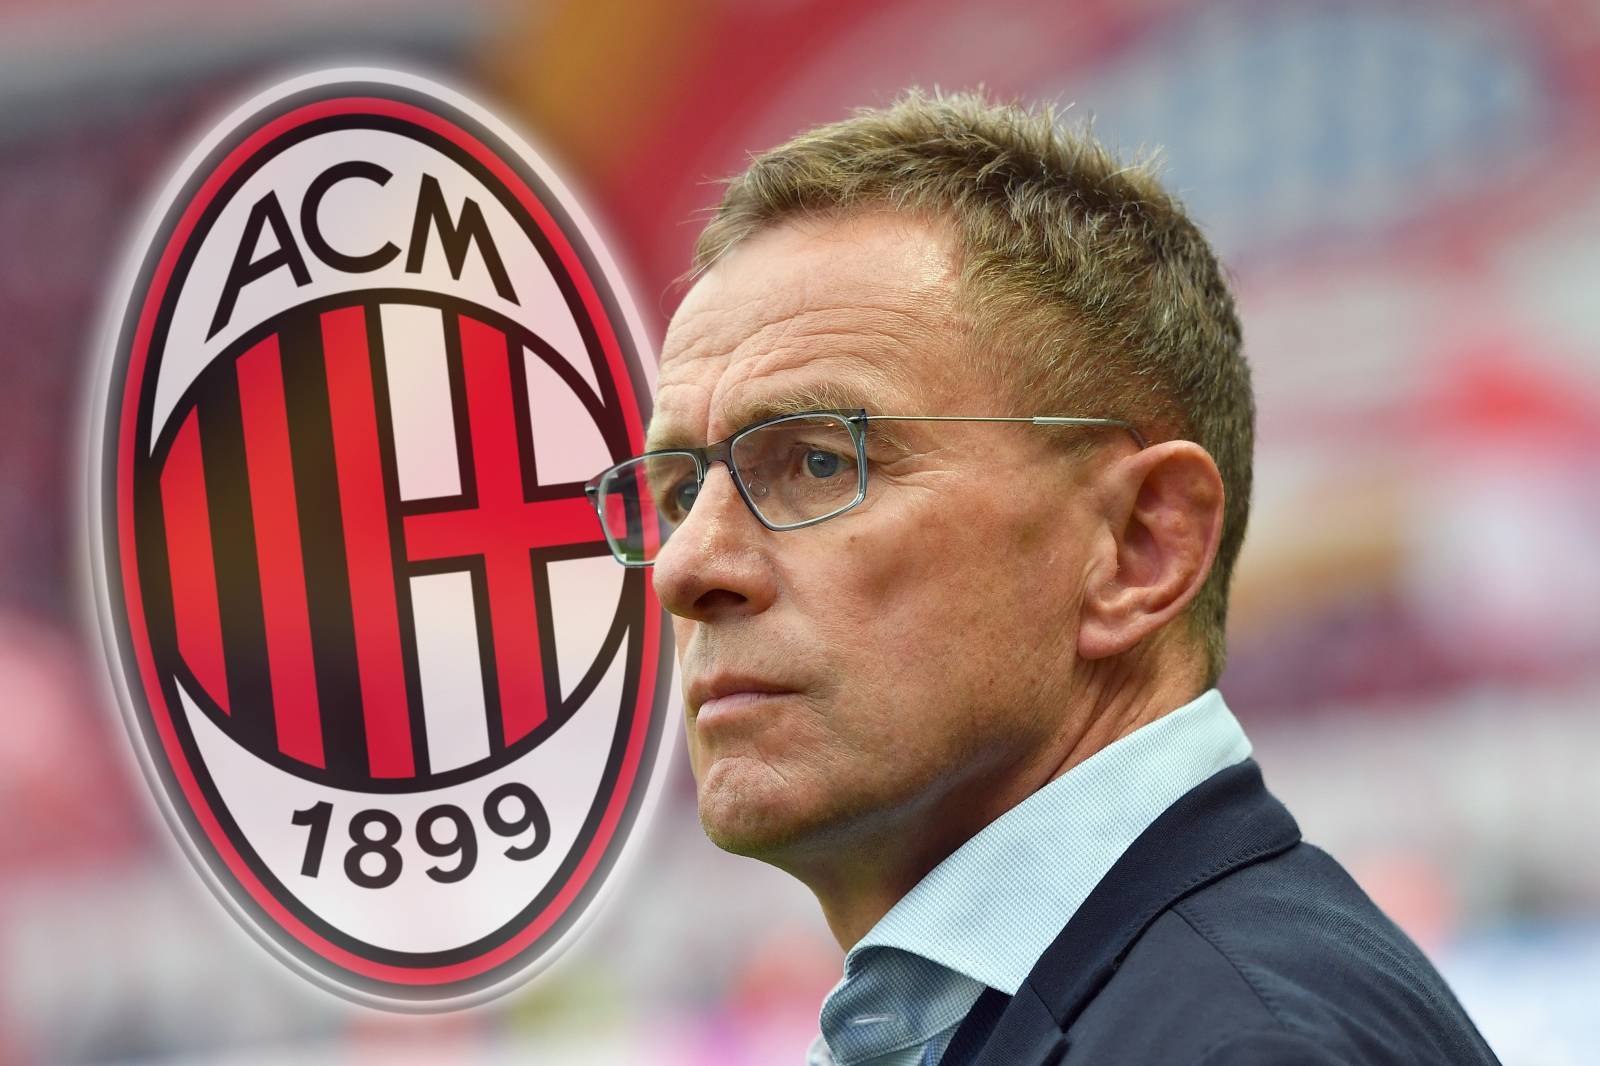 According to media report: Rangnick should become coach and sports director at AC Milan.